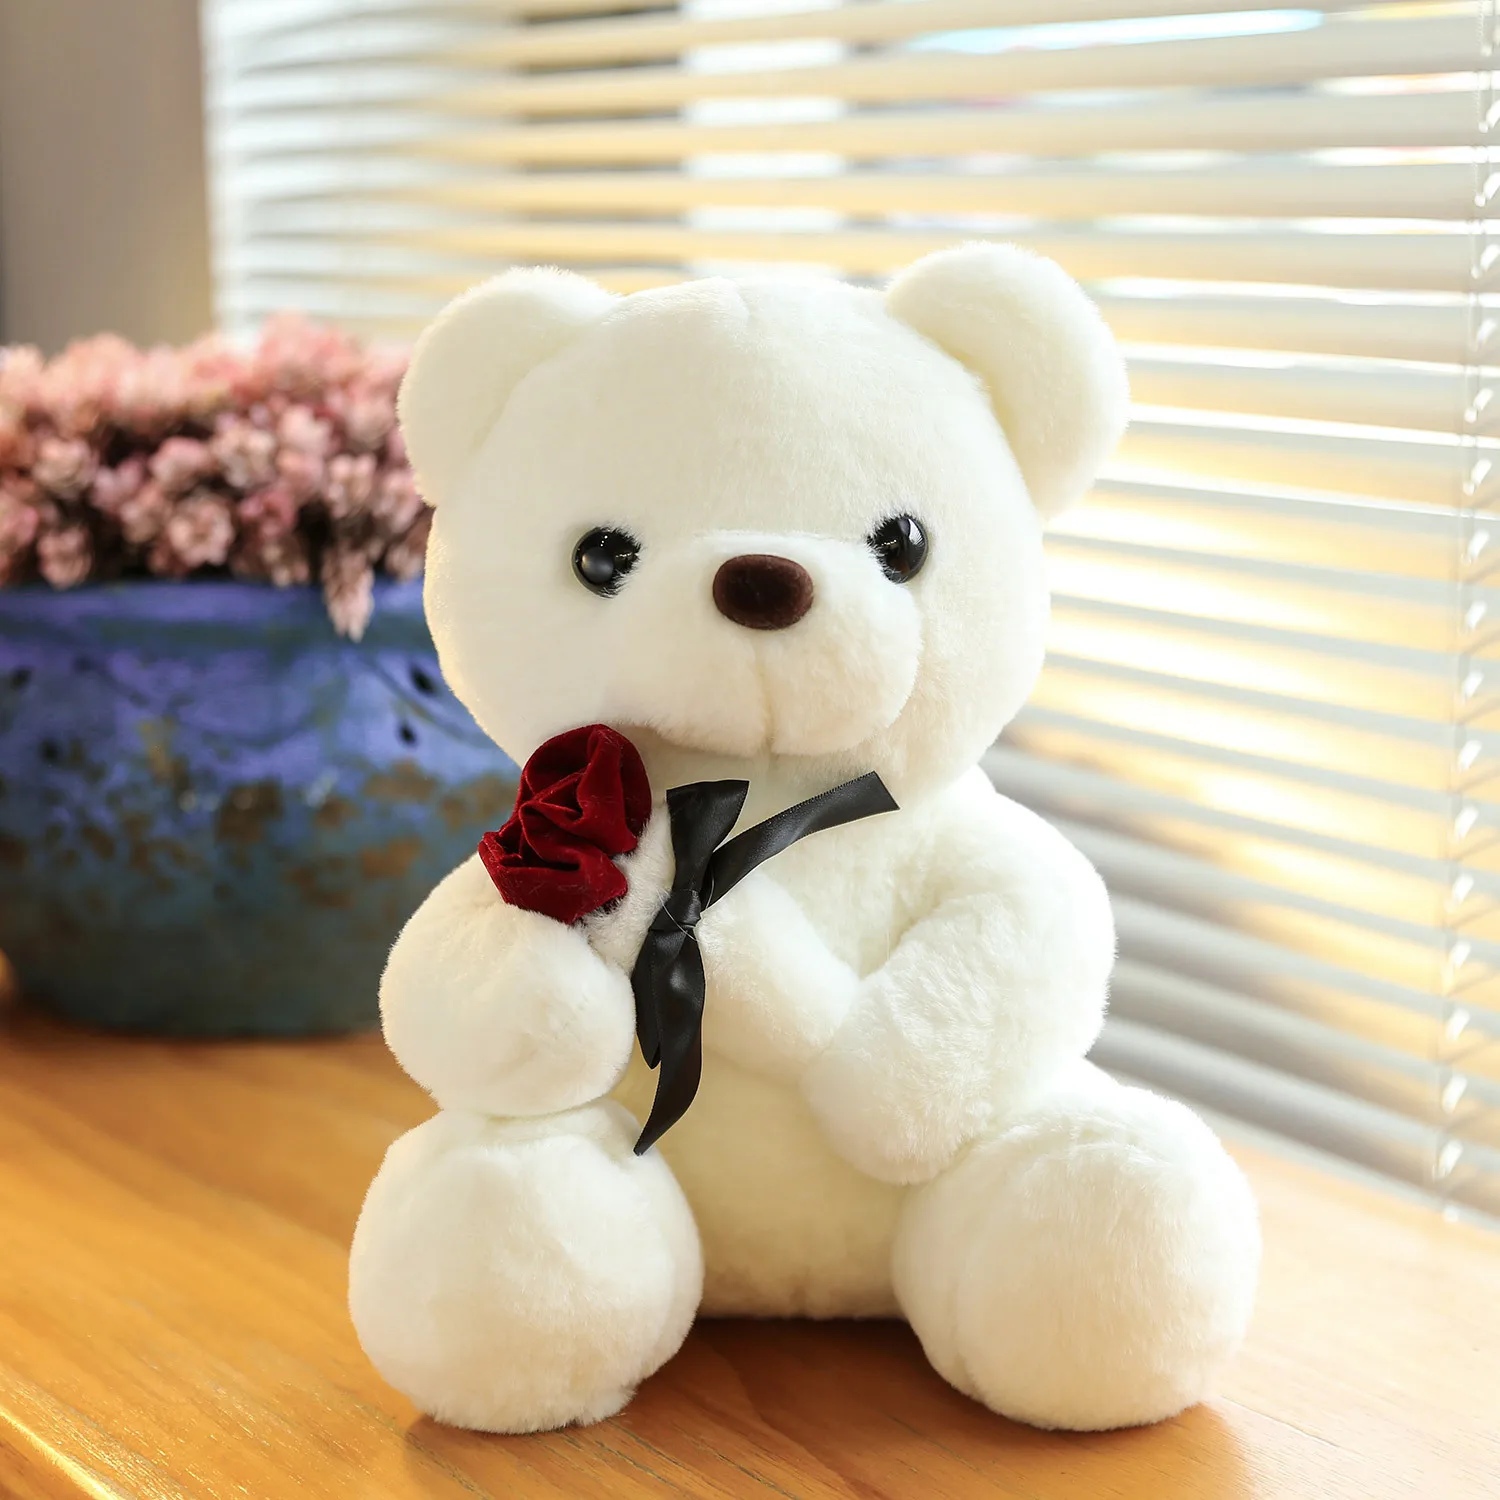 Stuffed Animal Cute Teddy Bear Plush Toy for Girls Bear Plush toy with Rose Rose Valentines Day Gifts Teddy Bear Plush toy